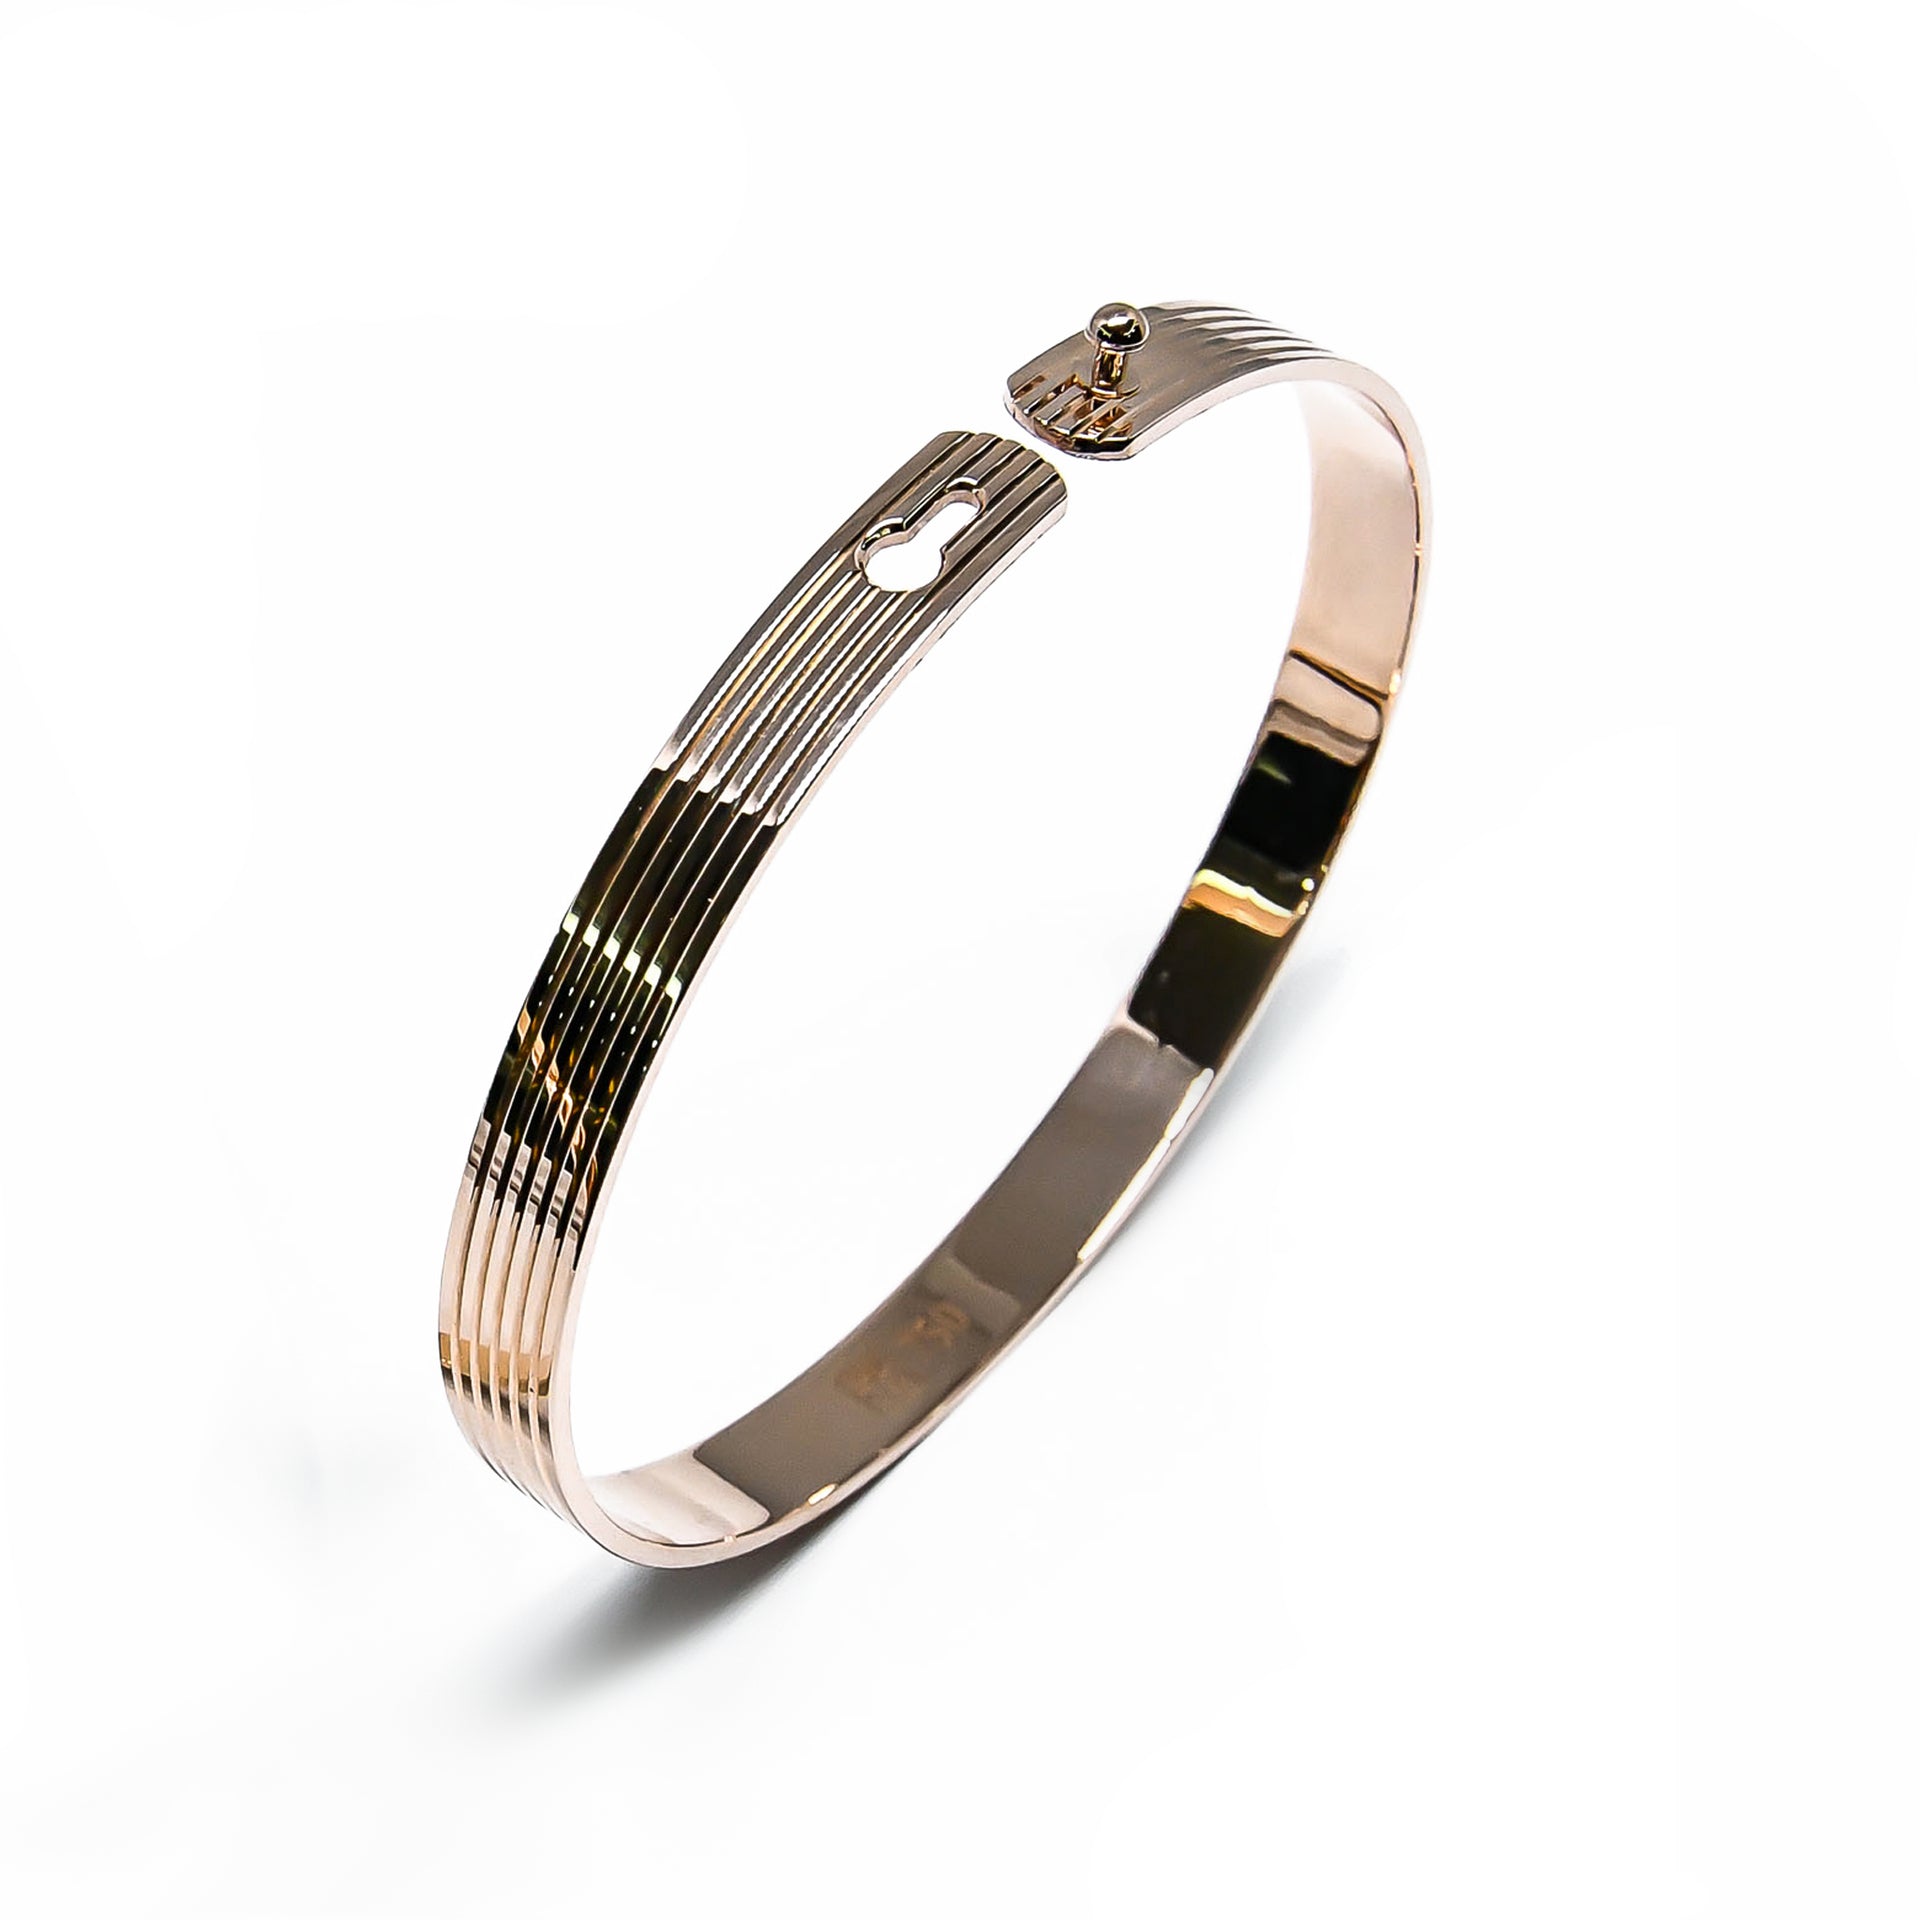 Bracelet MOTION 6mm flexible with pin claps red gold 18k 750